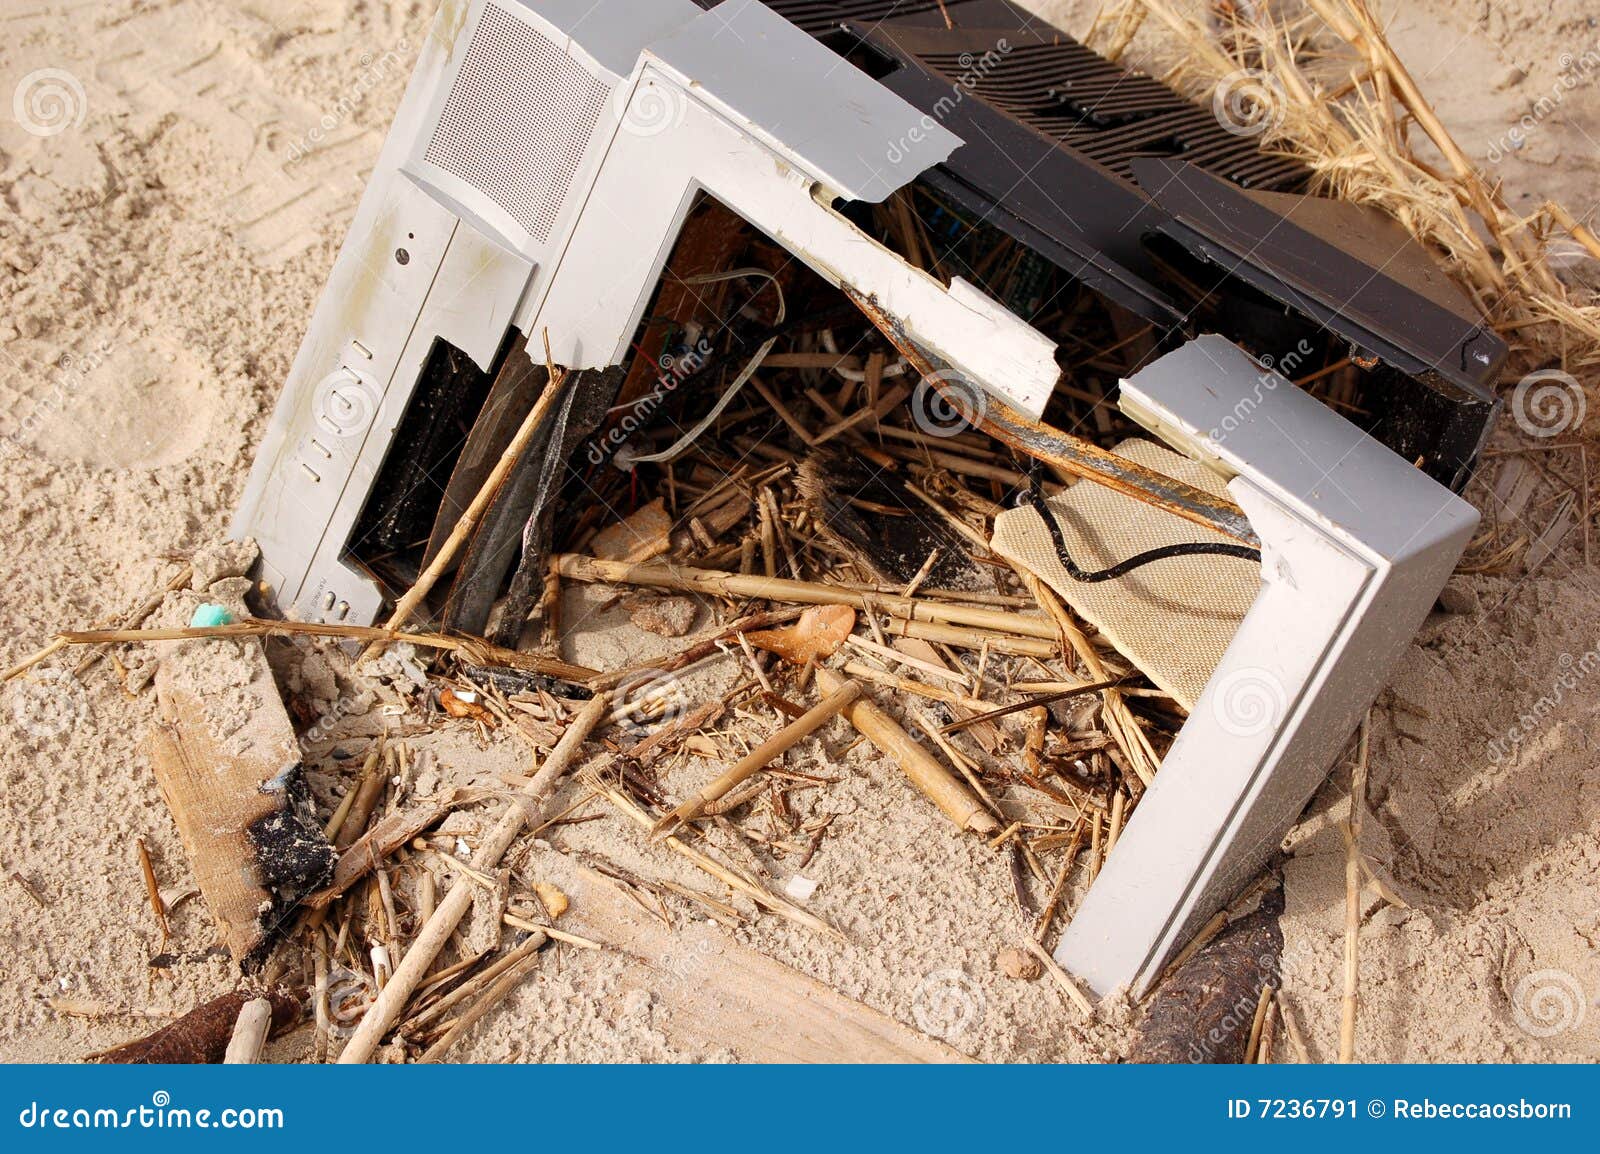 Hurricane Damage. A ruined TV set that was washed up on the beach after a Hurricane Ike.